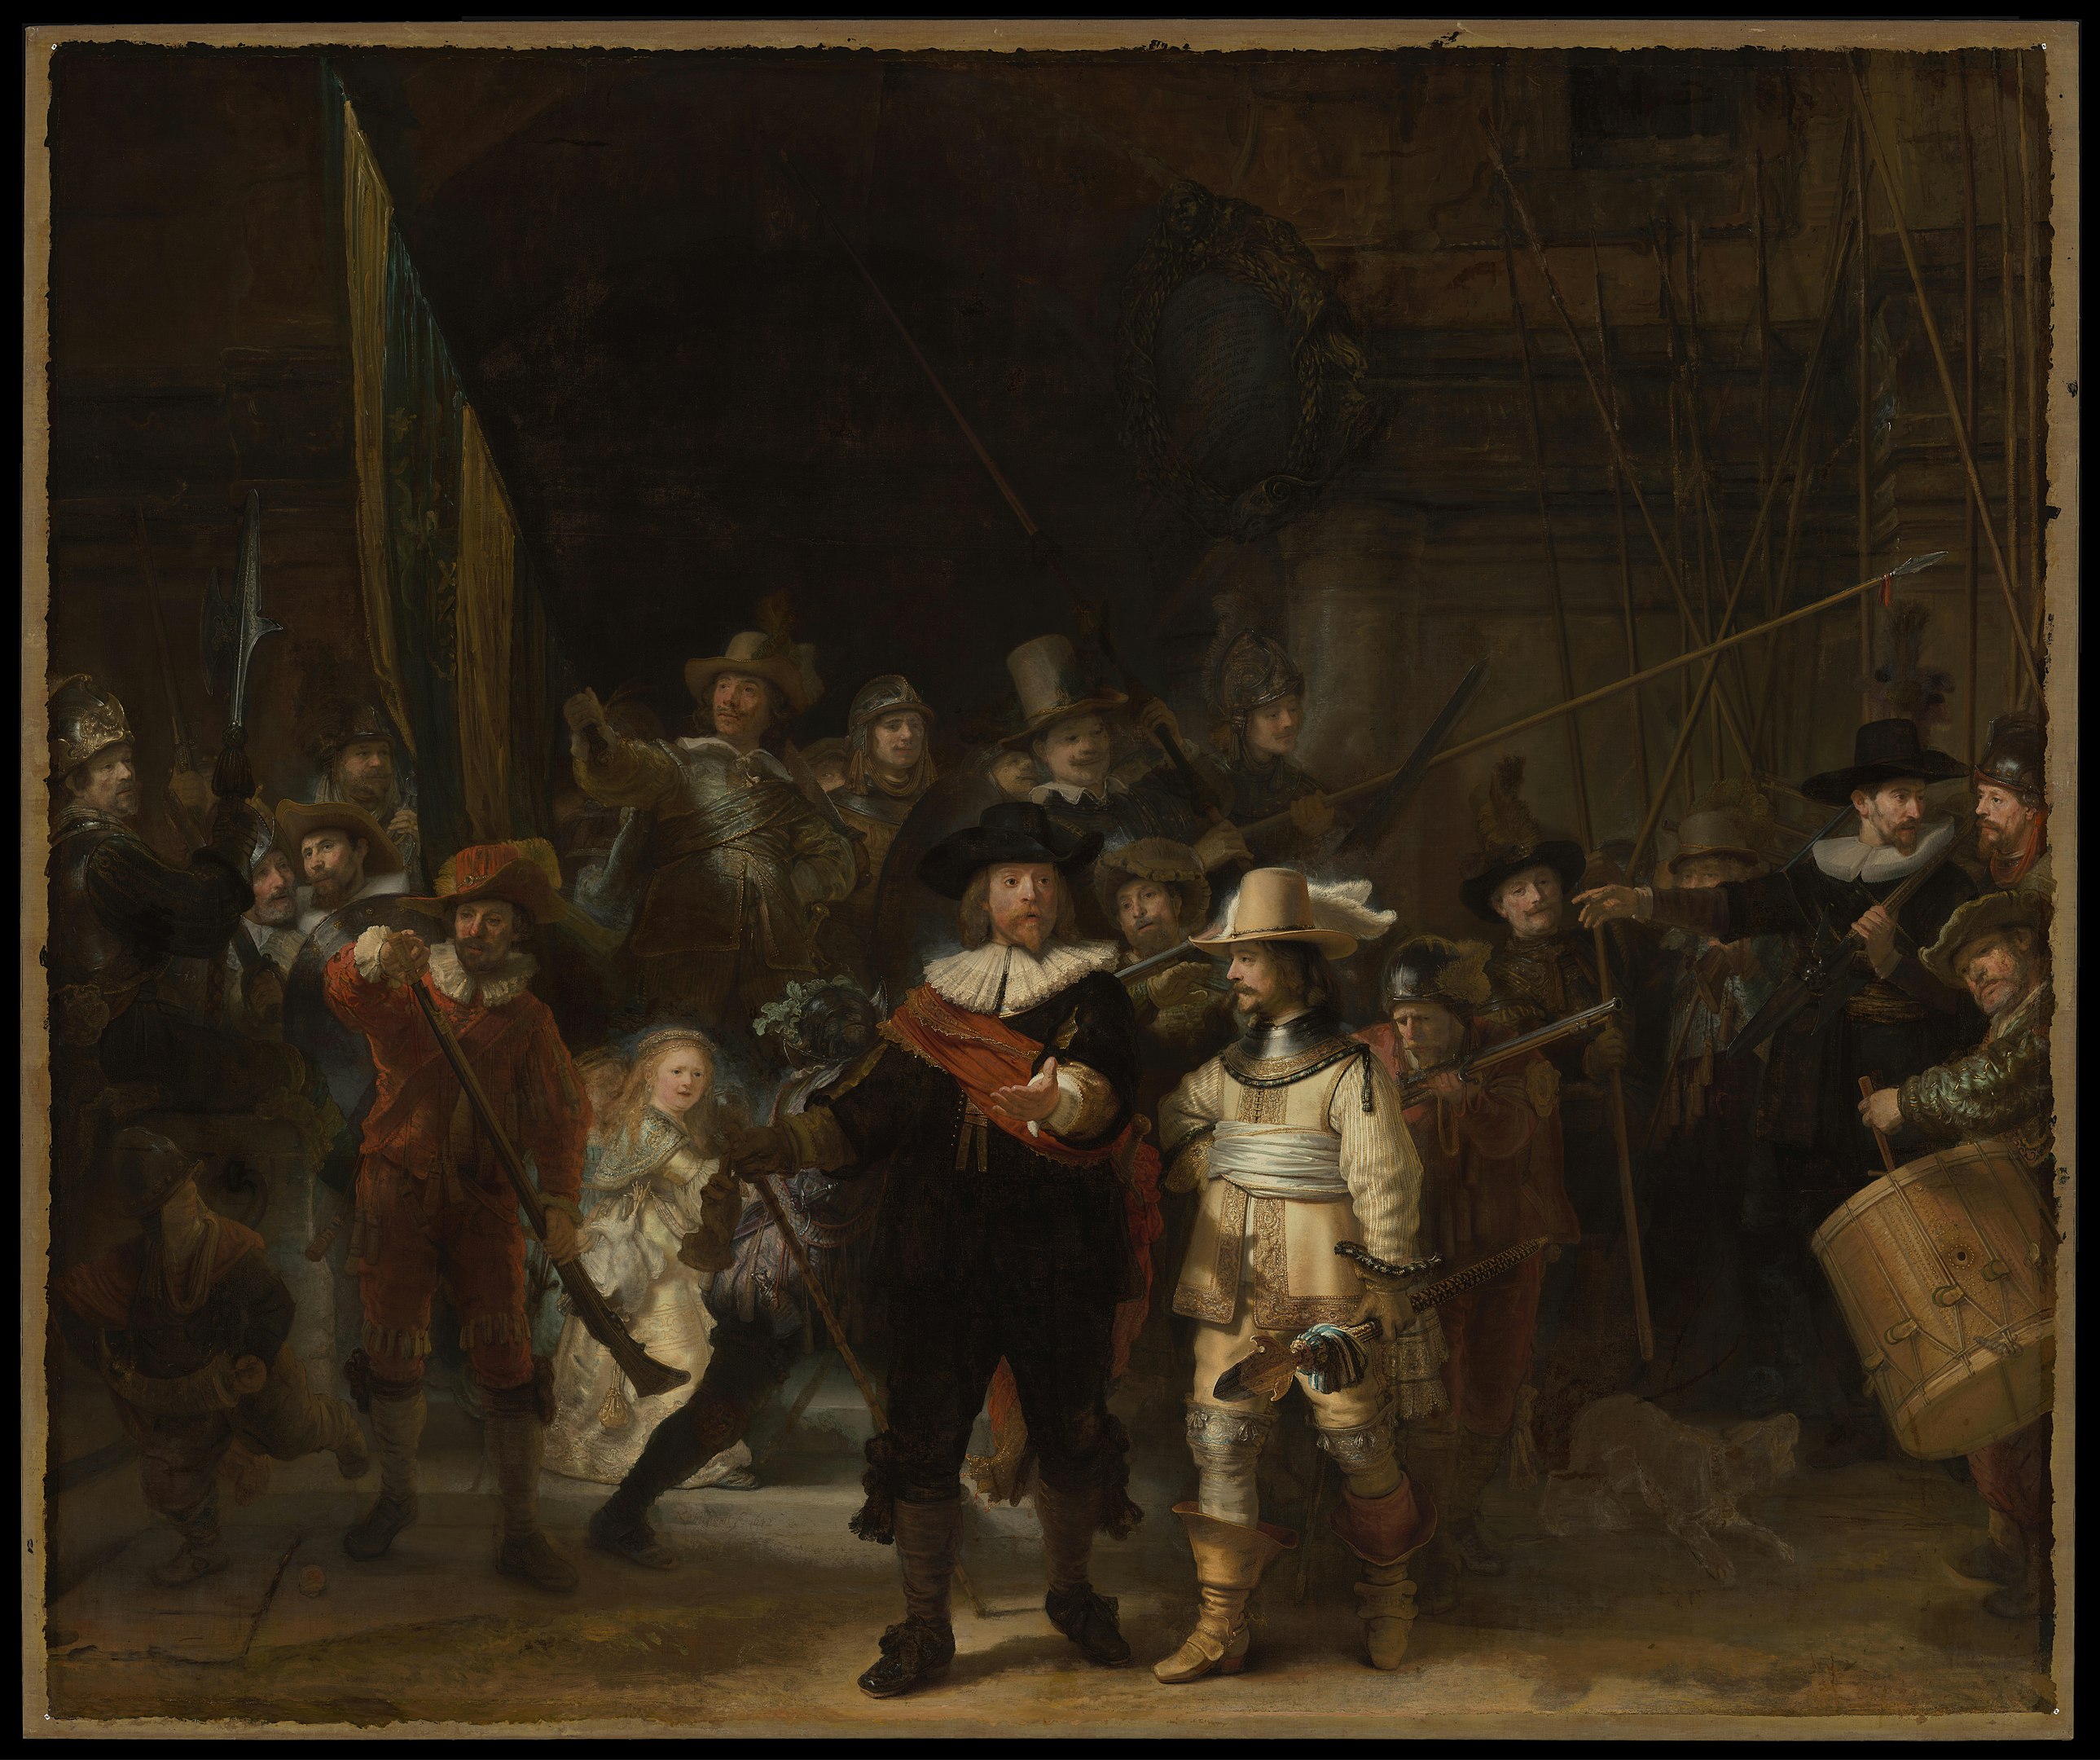 Rembrandt -The Night Watch